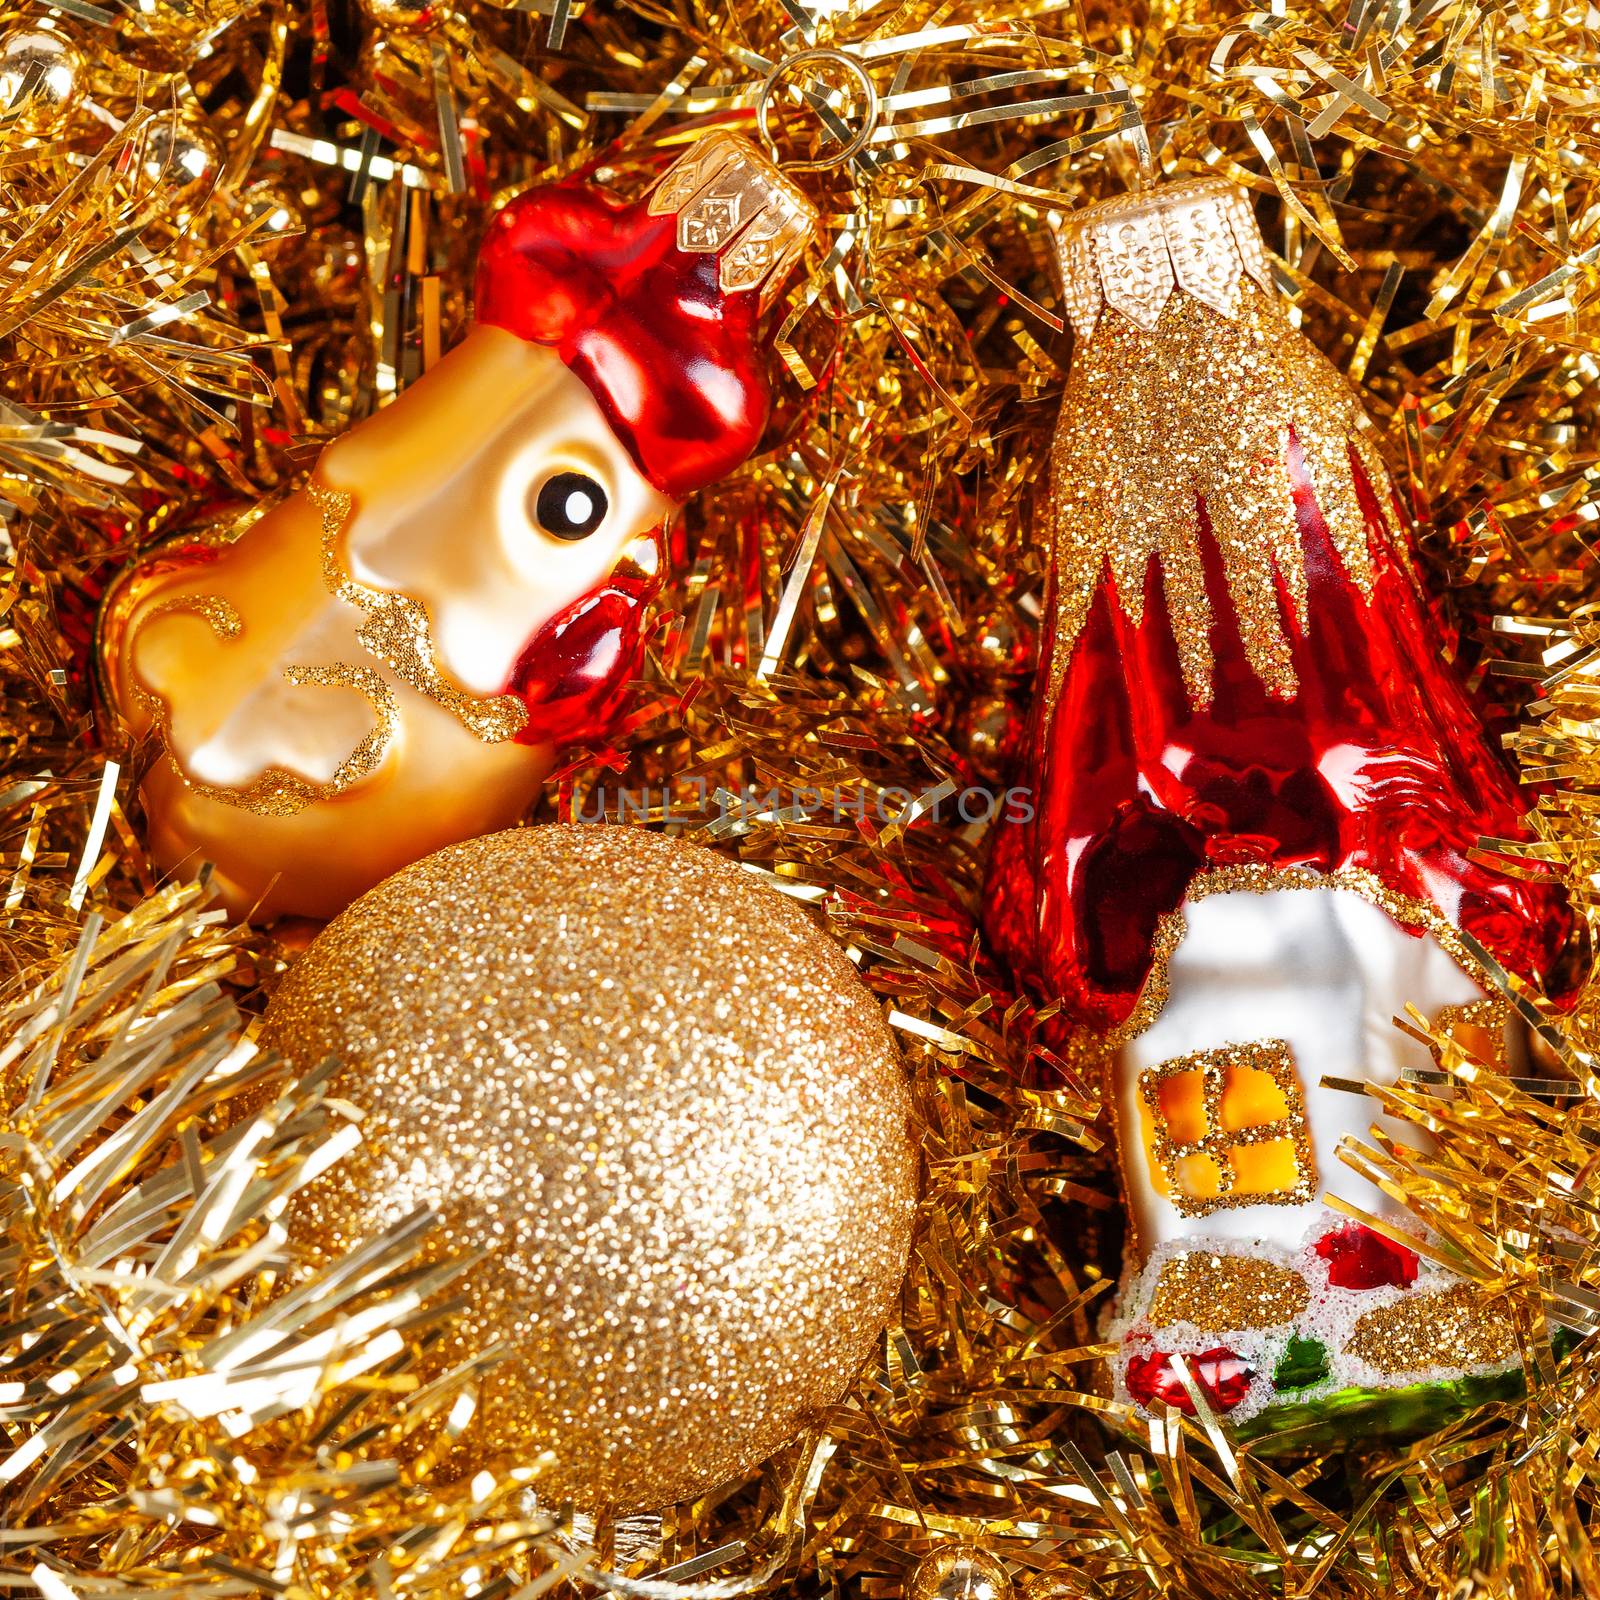 Golden glass rooster, toy house and ball in box with tinsel. Chr by aksenovko